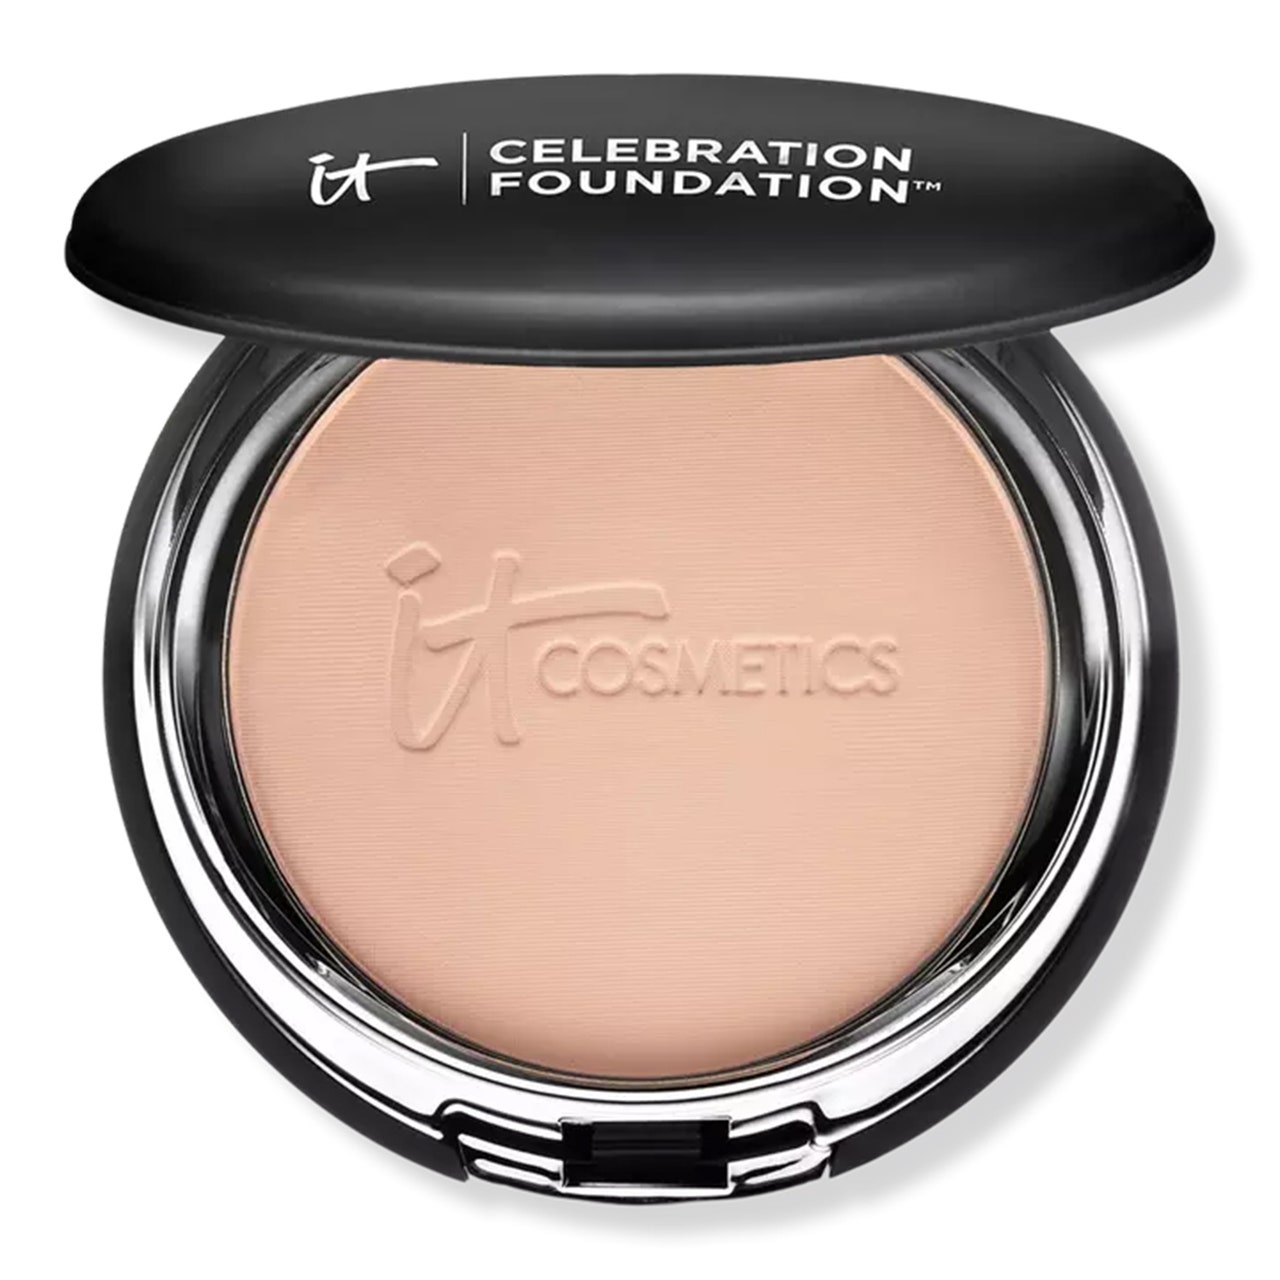  It Cosmetics Celebration Full Coverage Powder Foundation round black and silver compact of powder foundation on white background